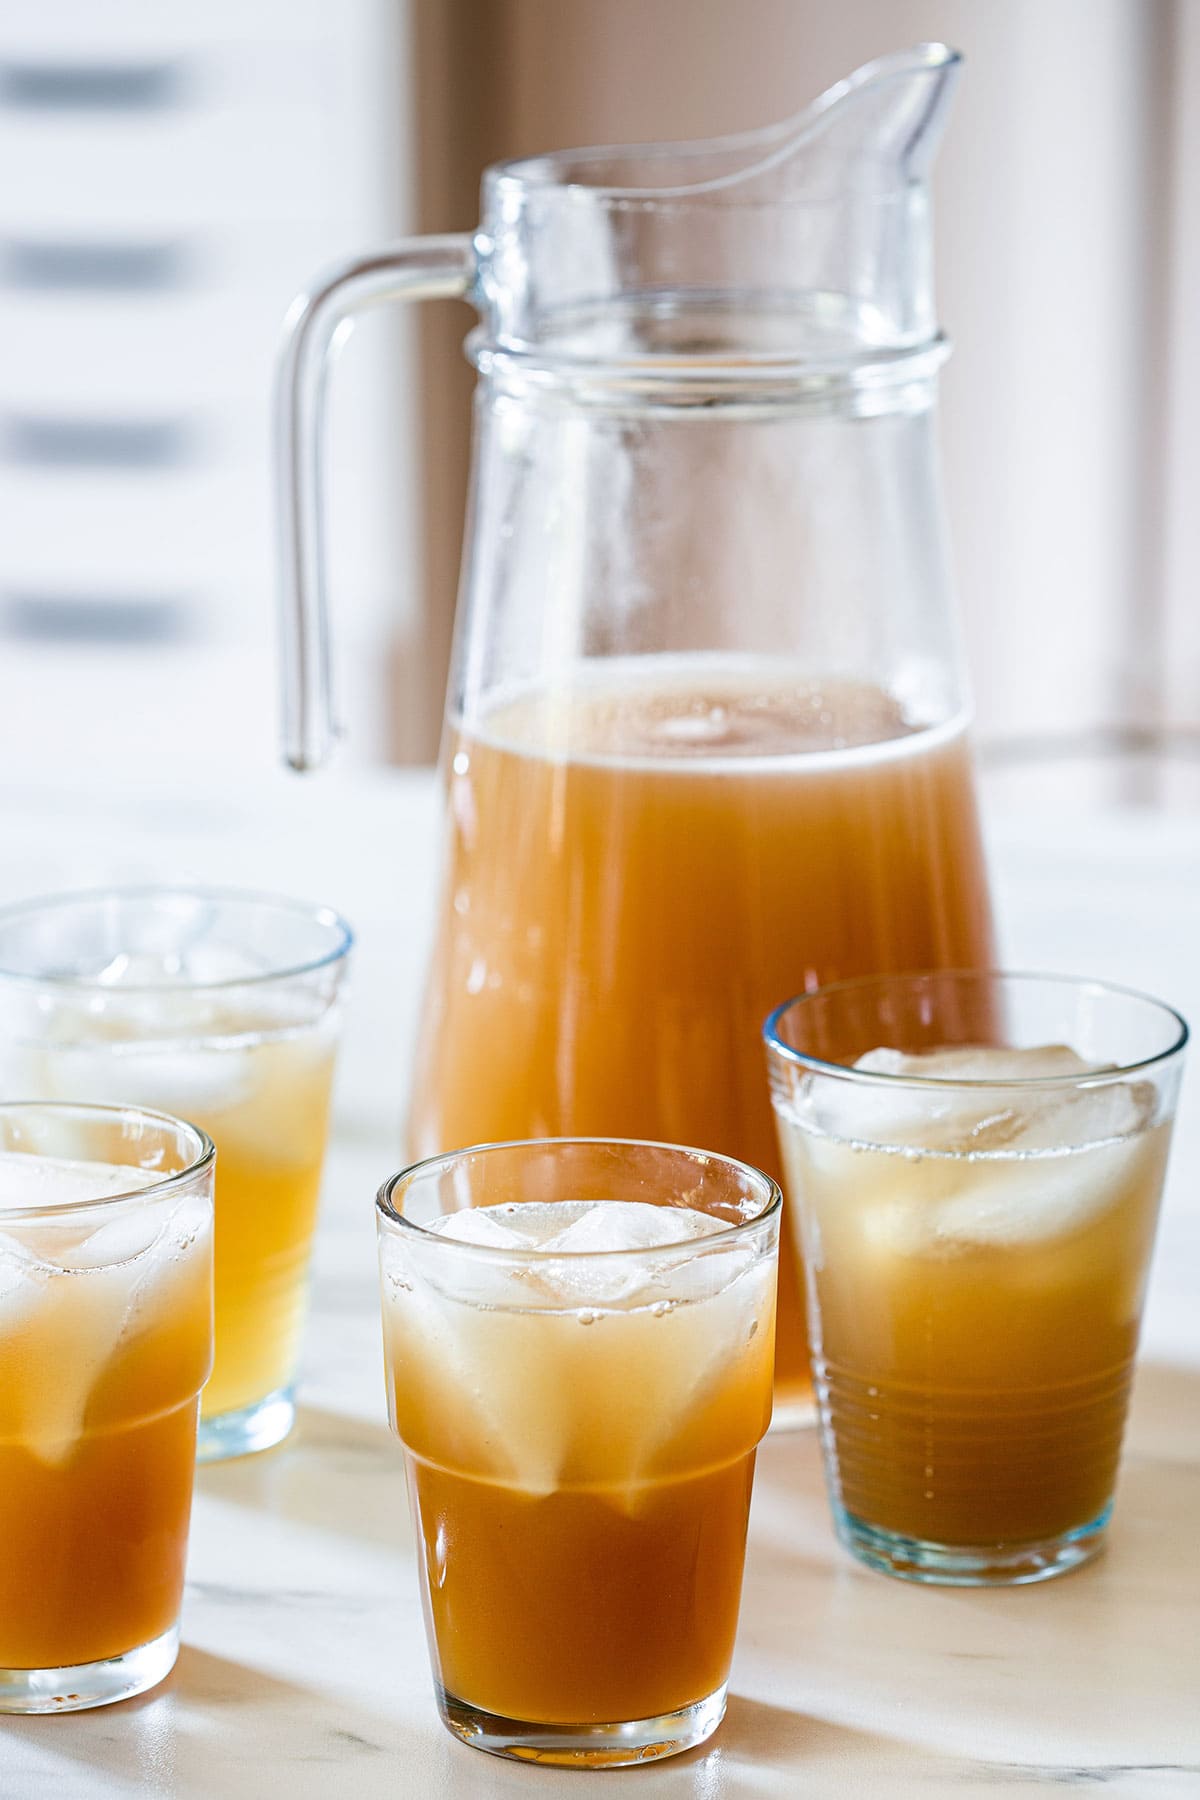 Tamarindo drink, also known as agua de tamarindo, on a pitcher and served in glasses with ice.